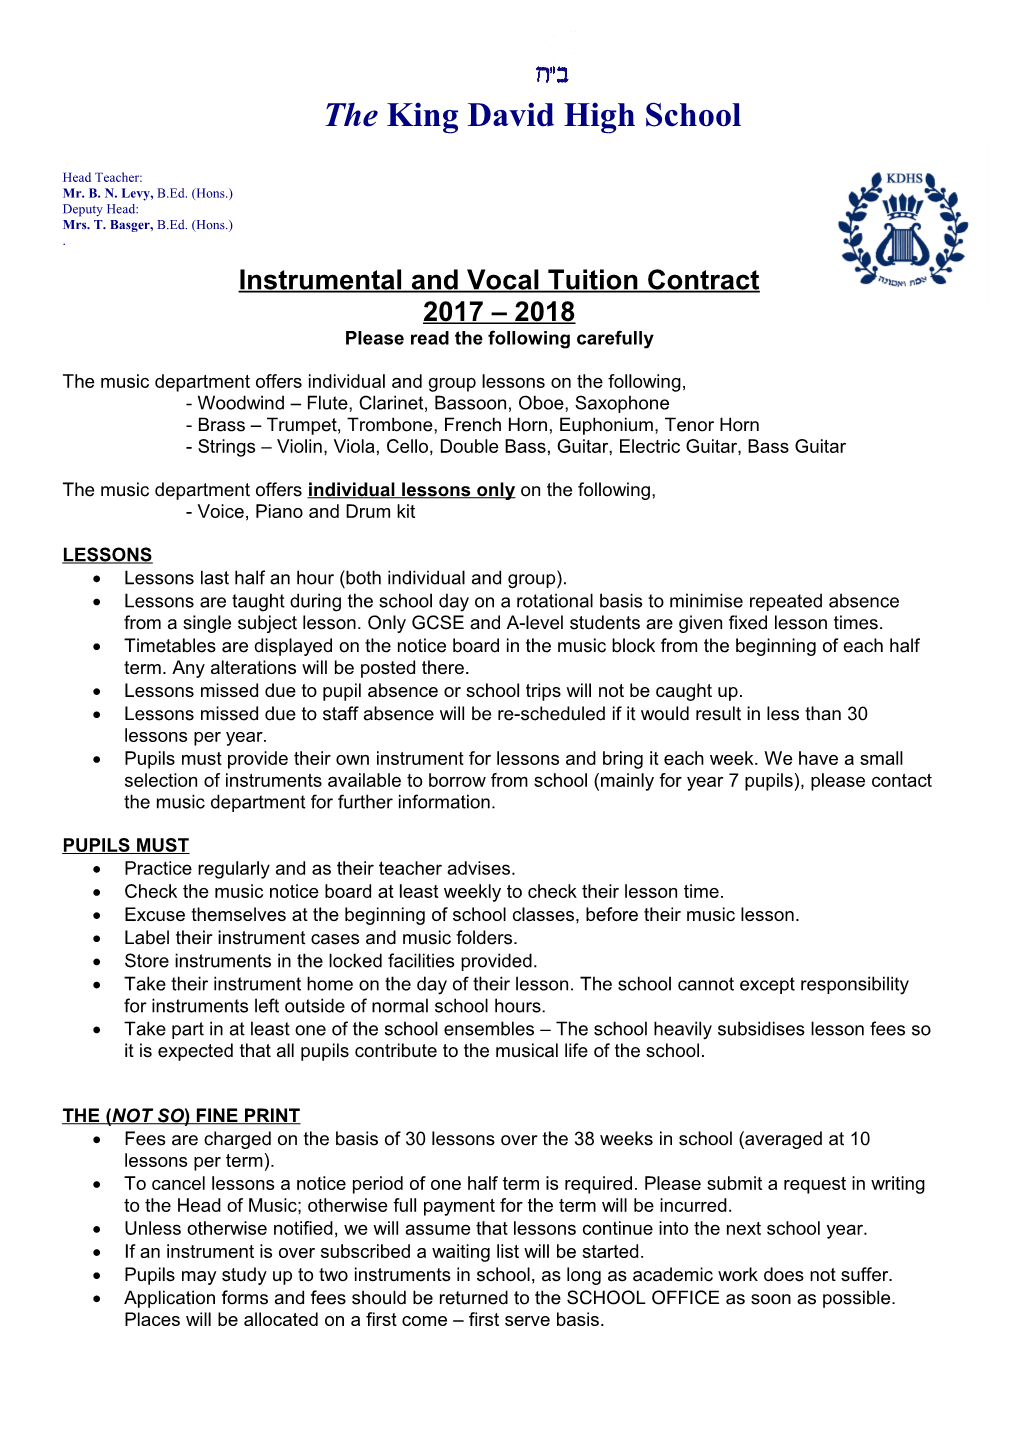 Instrumental and Vocal Tuition Contract